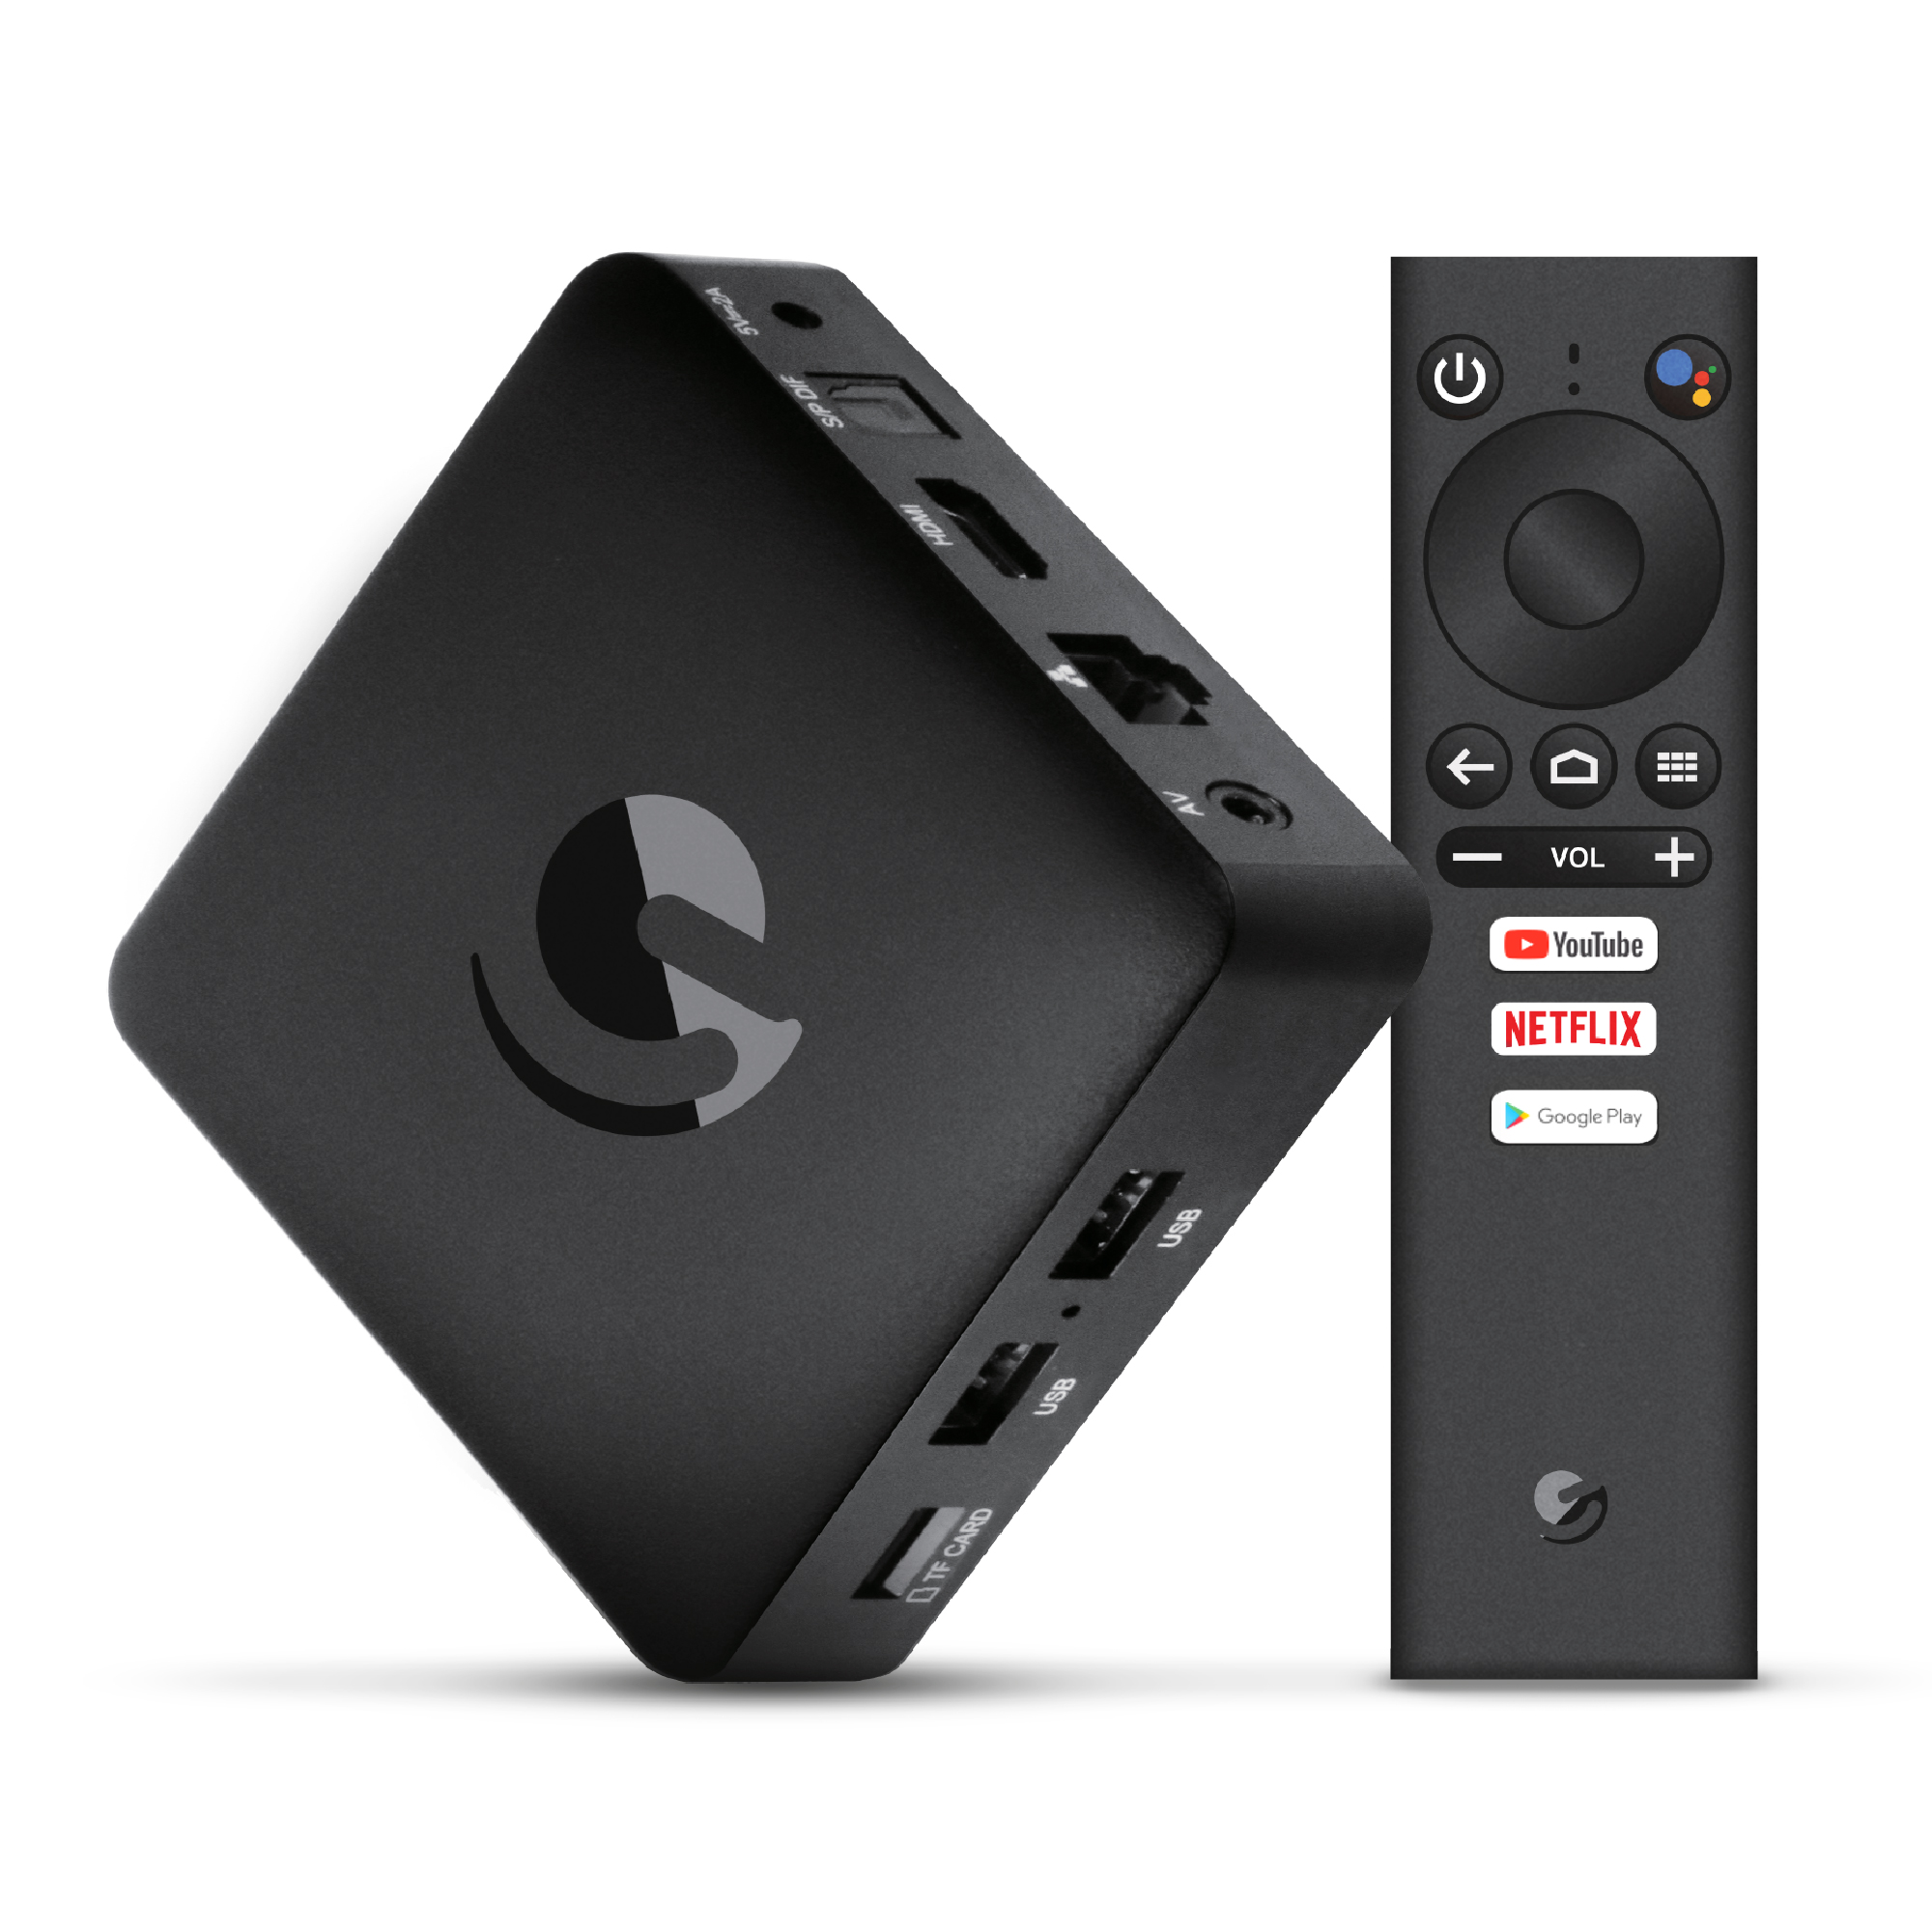 Ematic Jetstream 4K Ultra HD Android TV Box with Voice Search Remote (AGT418) - image 1 of 18